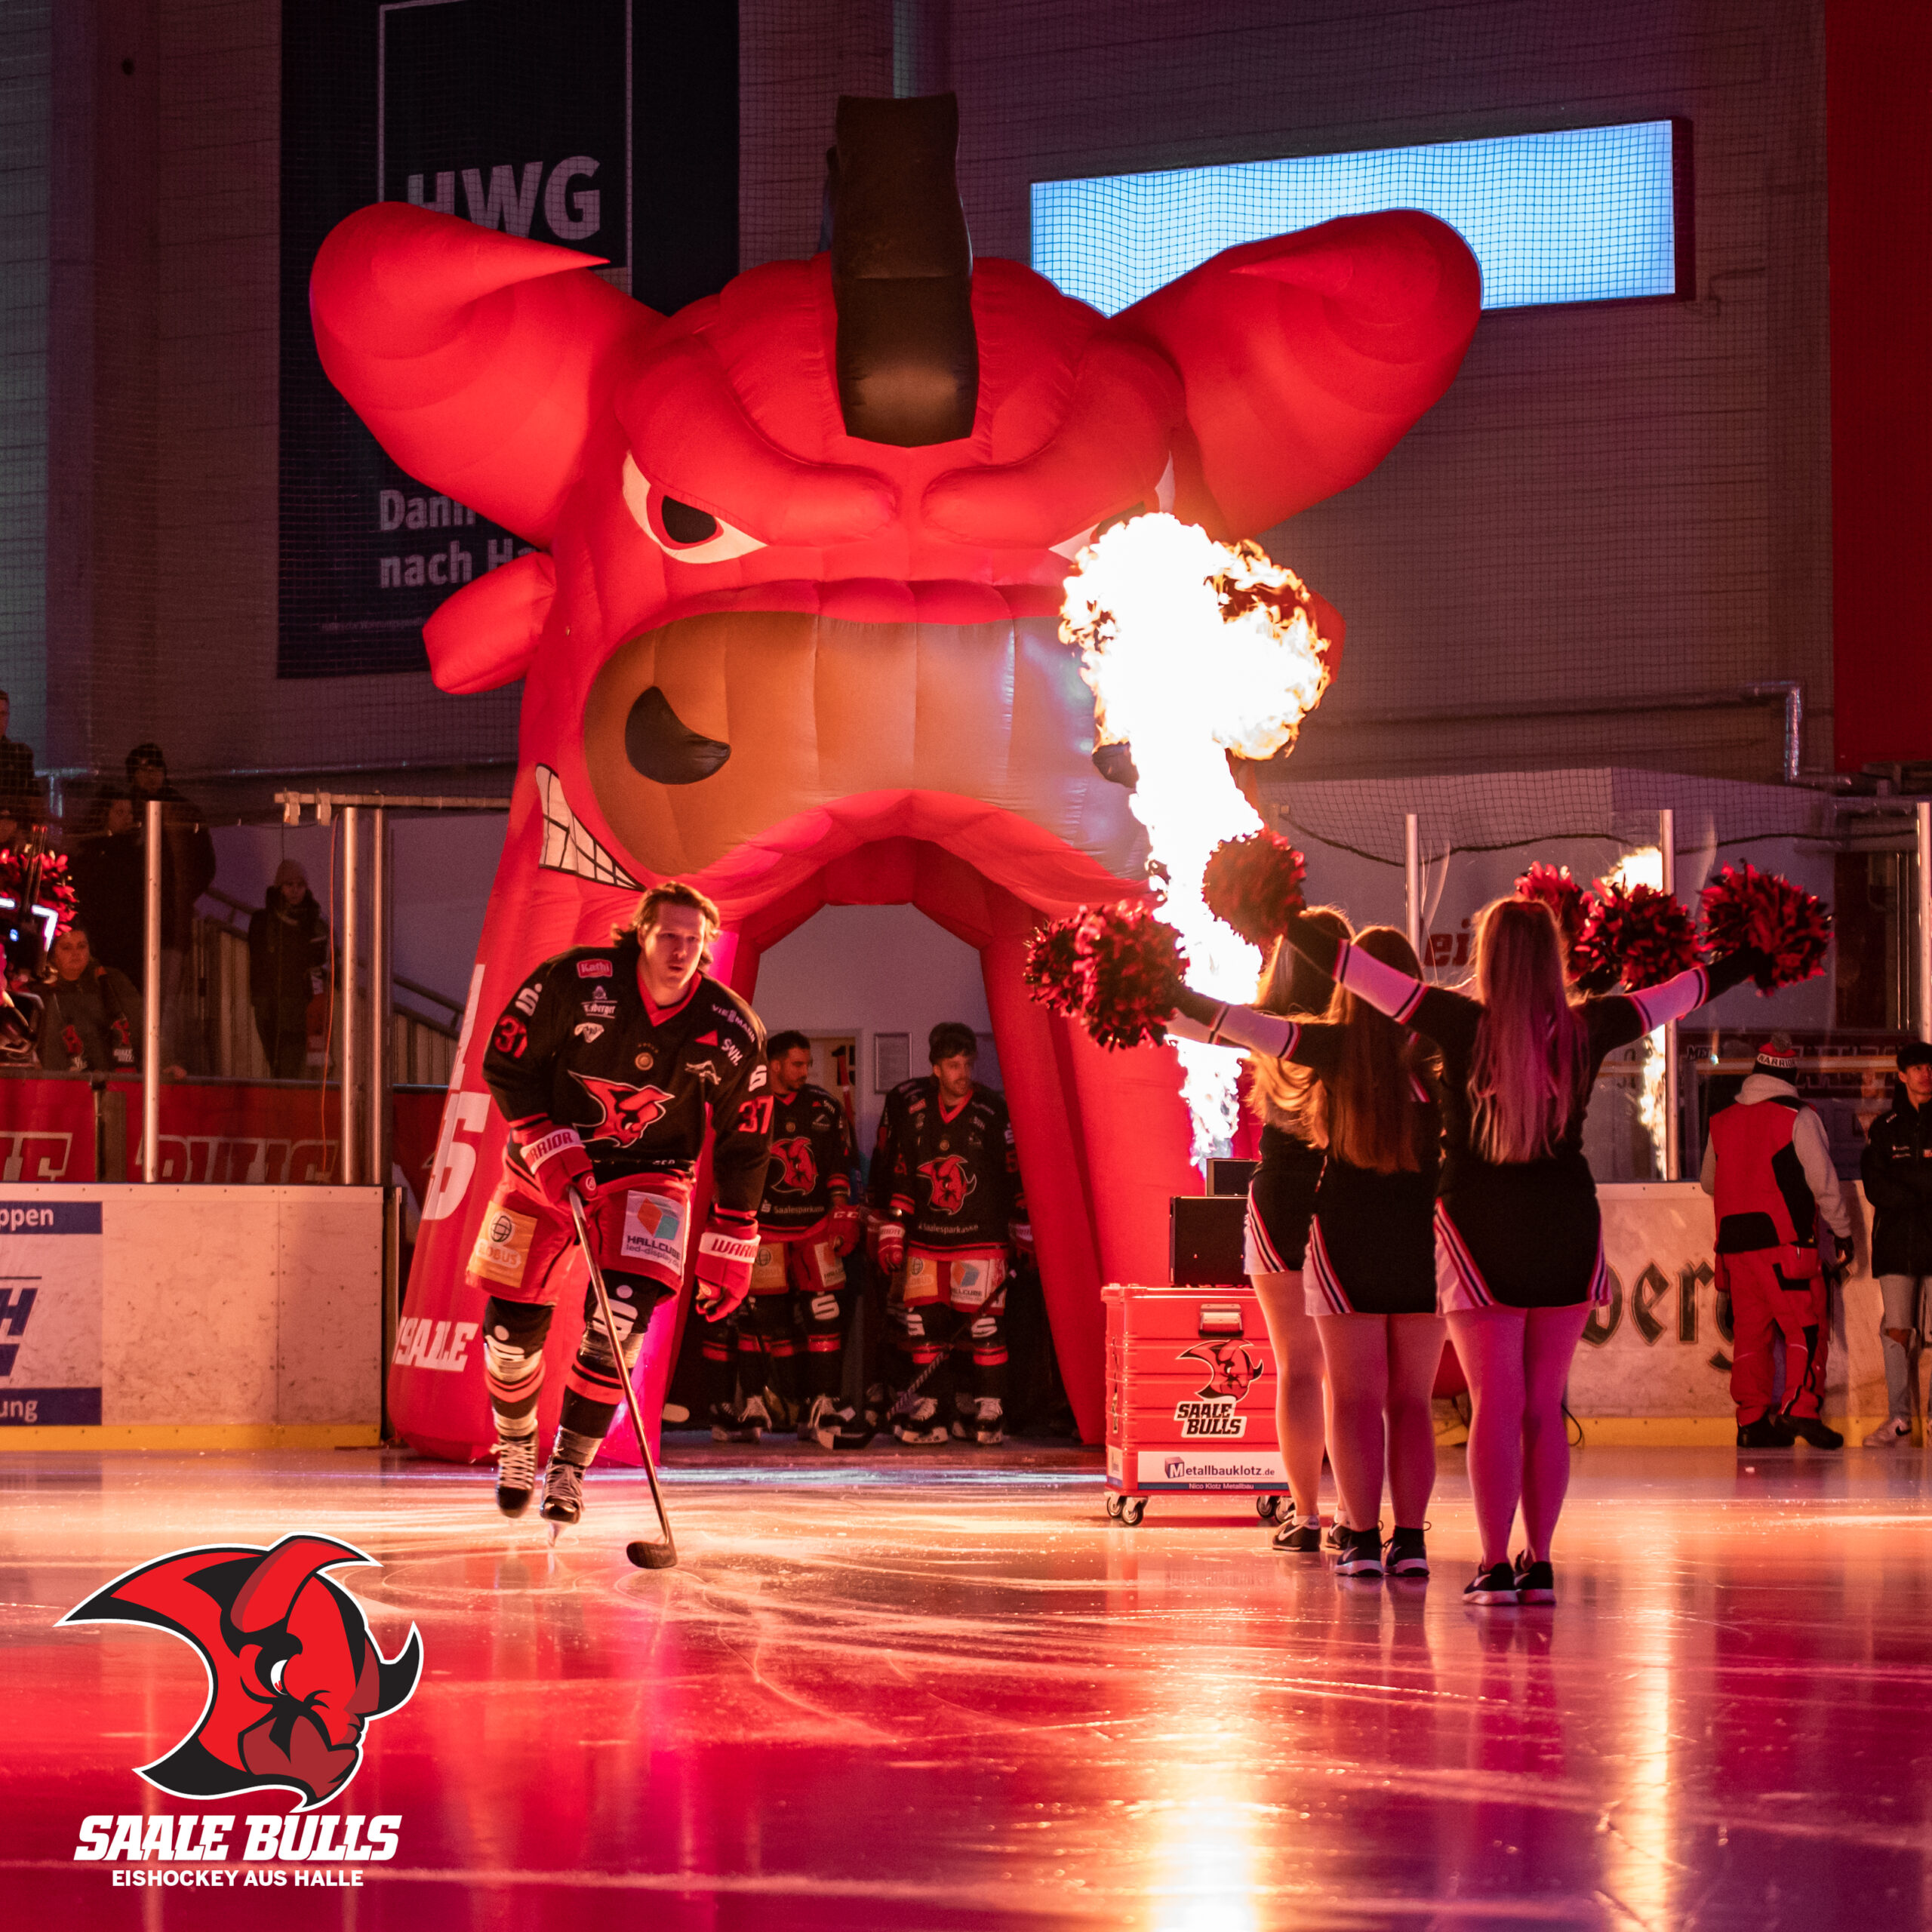 Saale Bulls - Hannover Indians 20.11.2022